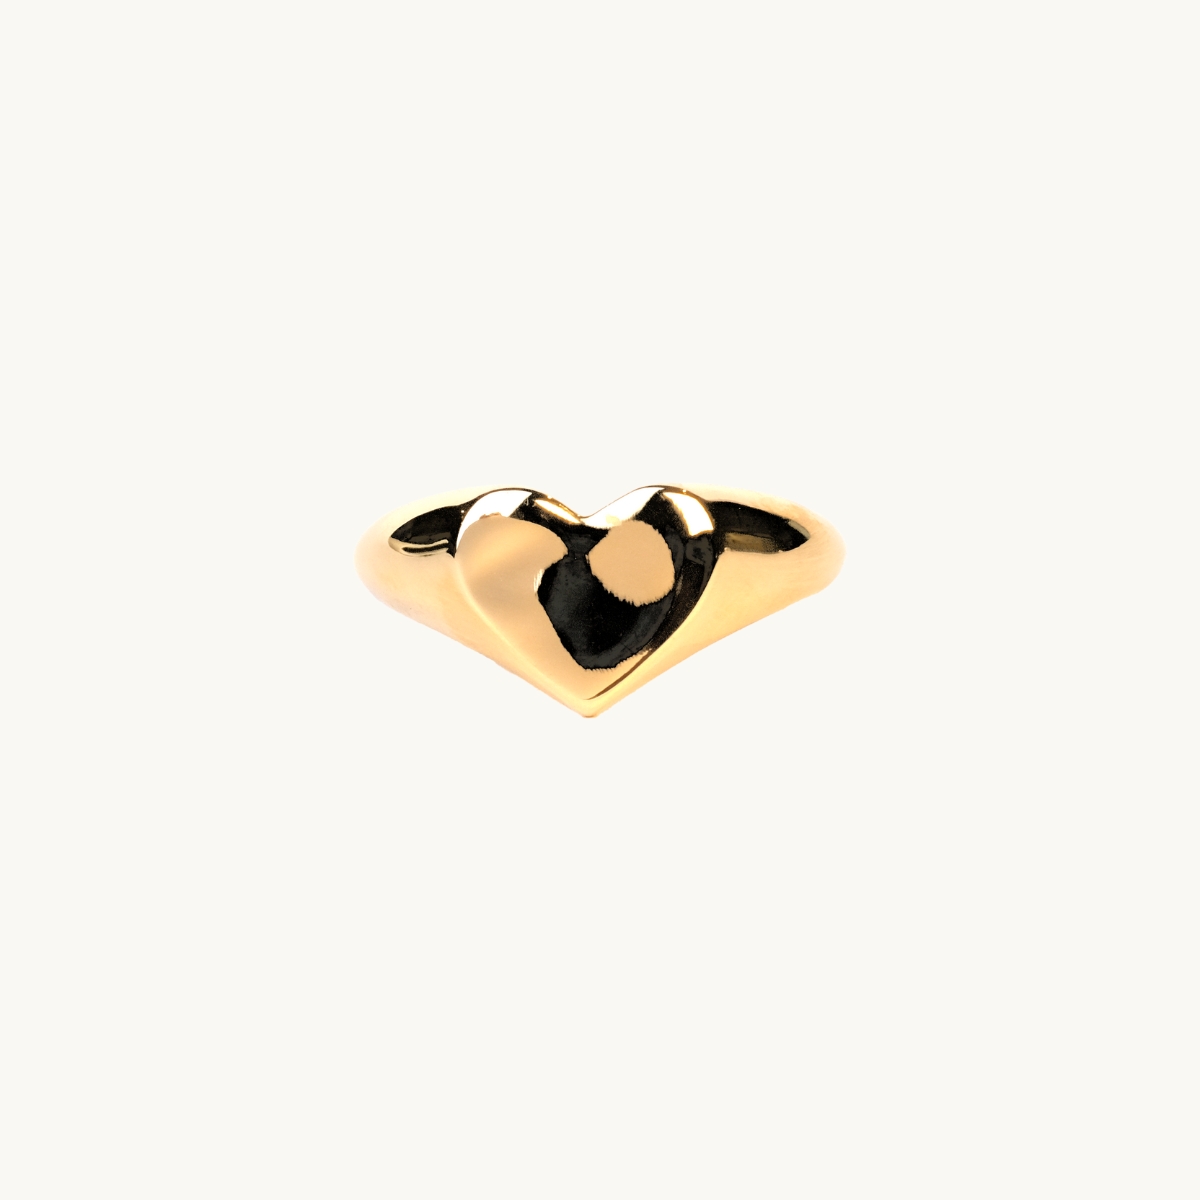 A heart ring in gold with an organic shape